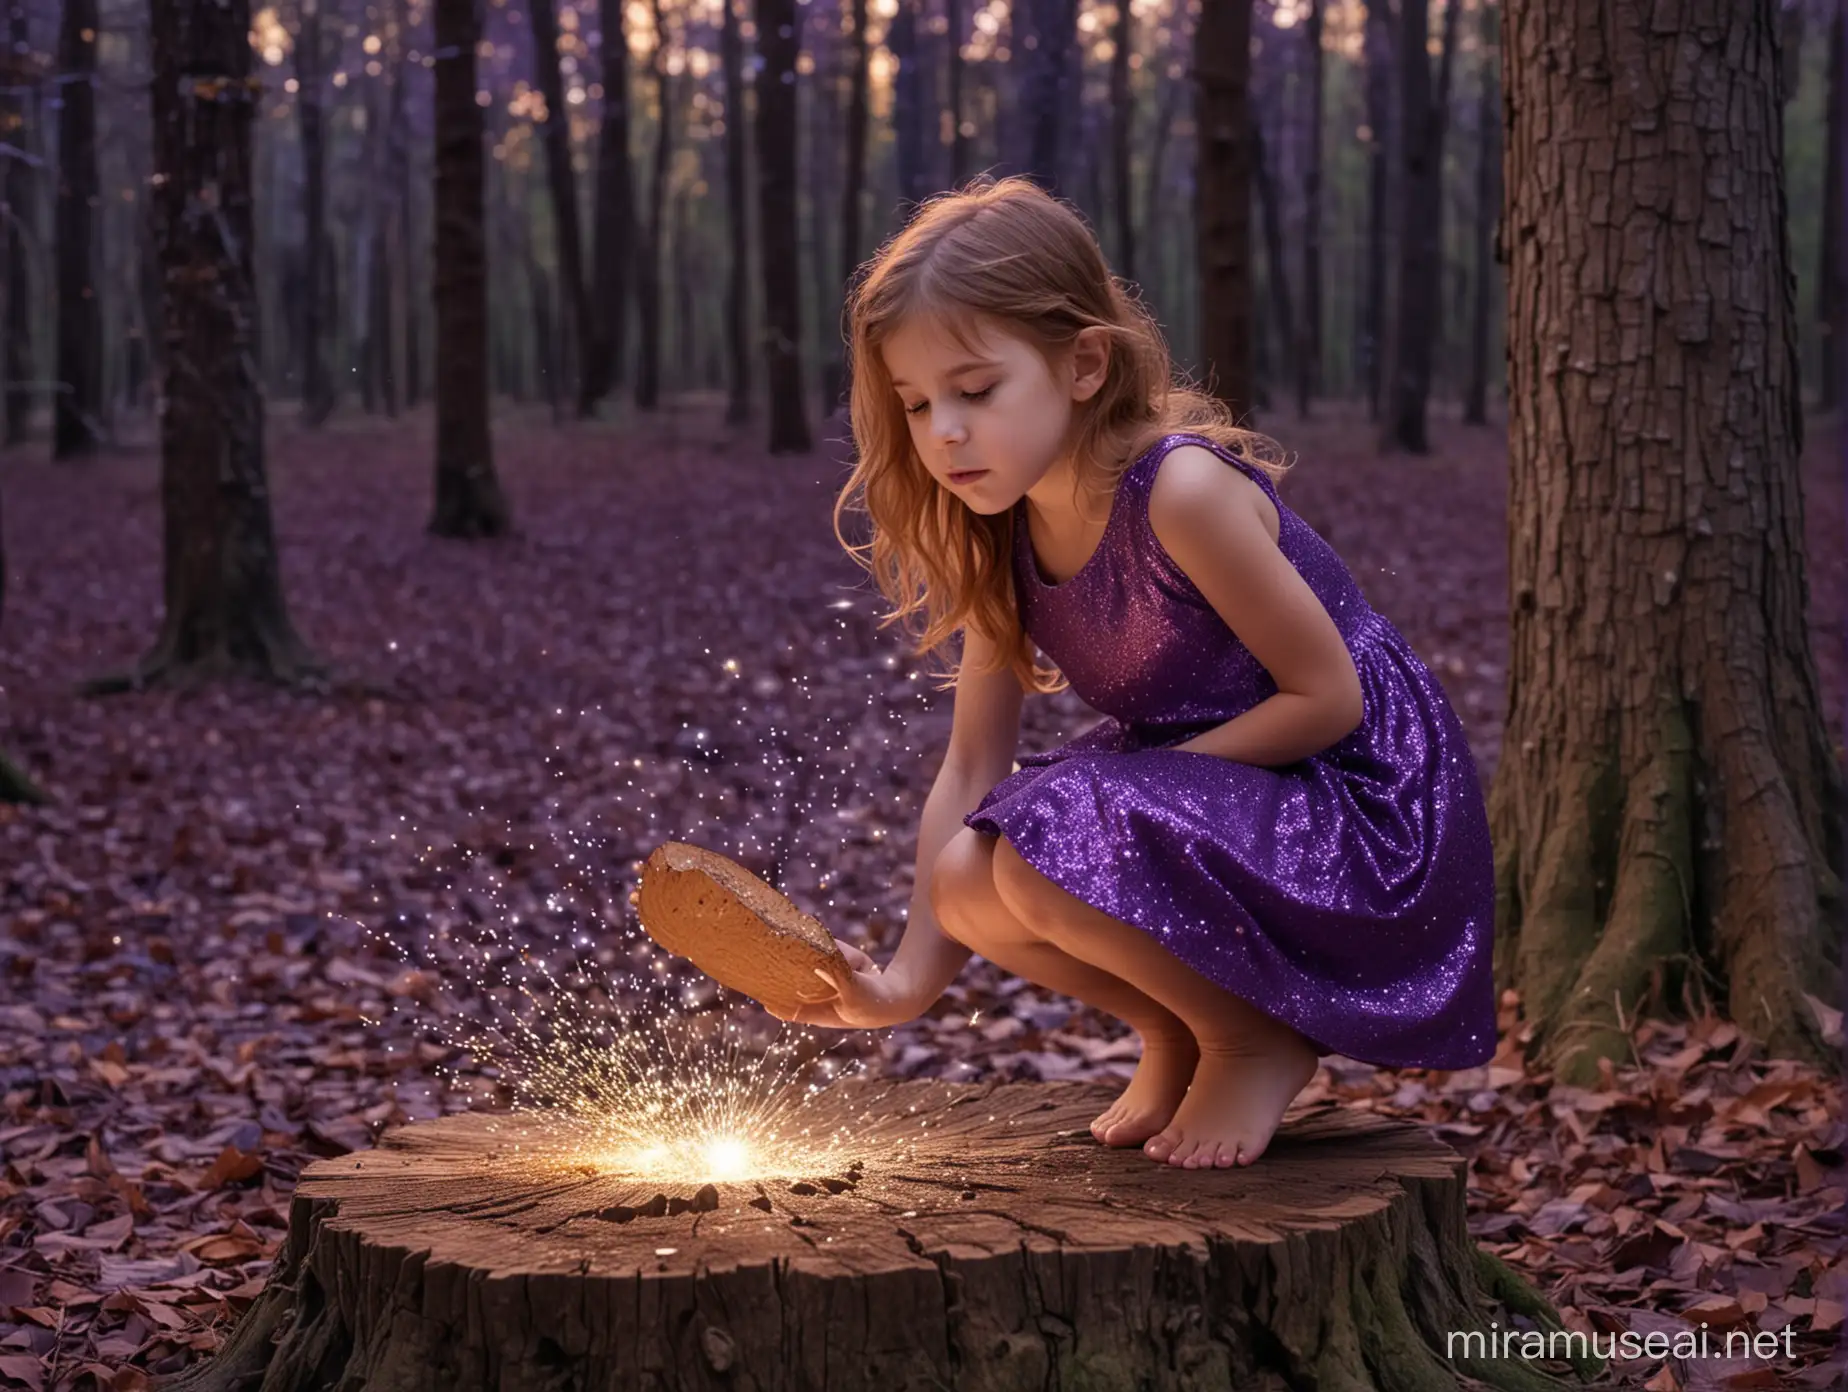 Magical Forest Encounter ChestnutHaired Girl in Purple Dress